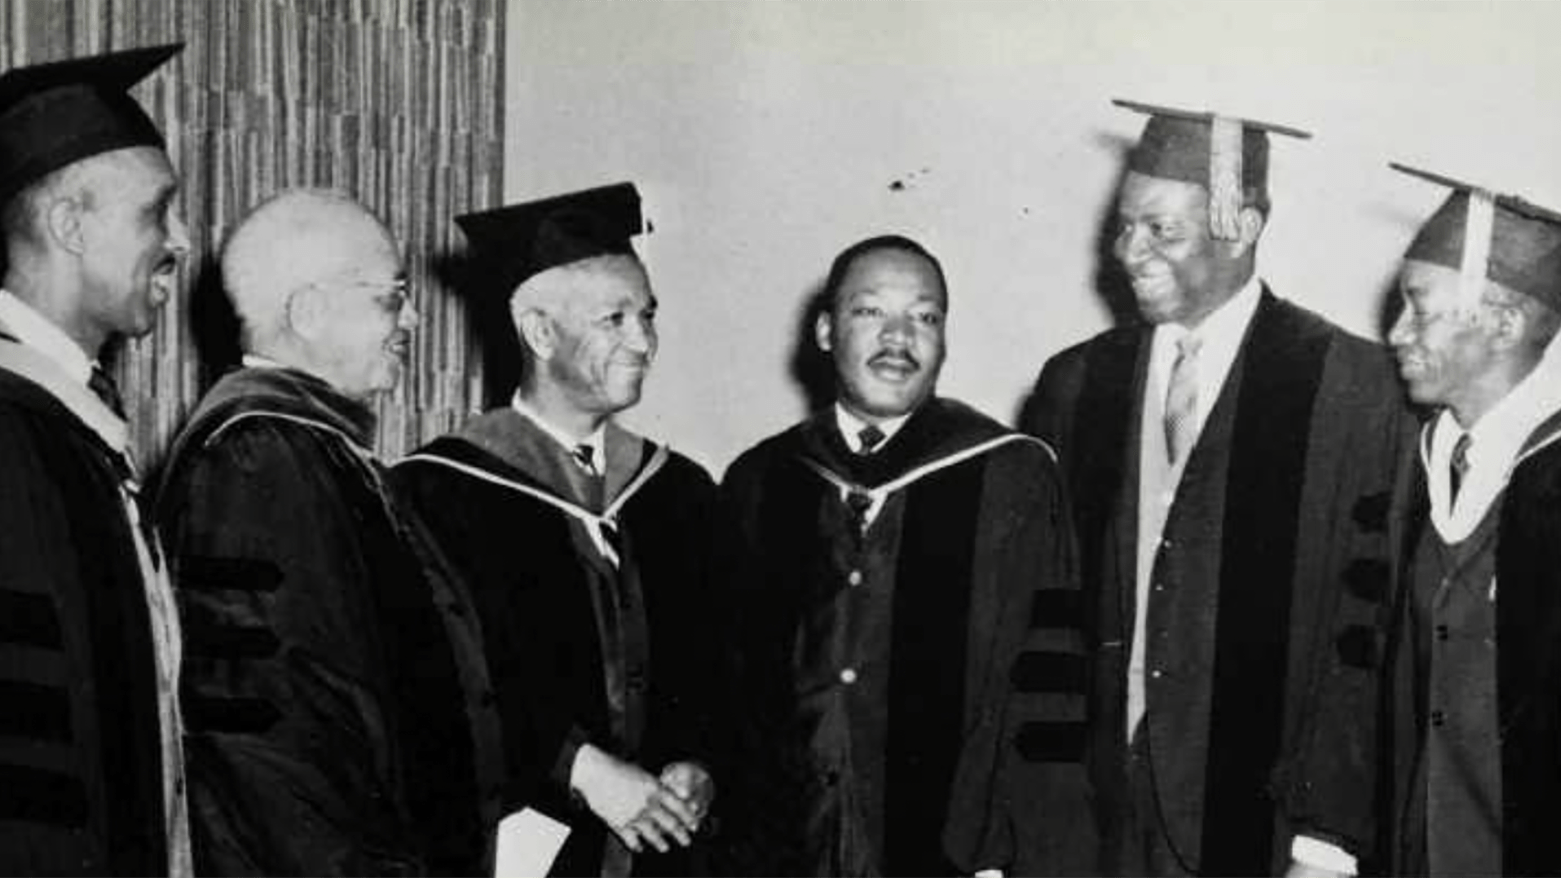 Martin Luther King Jr. at Charter Day in 1965